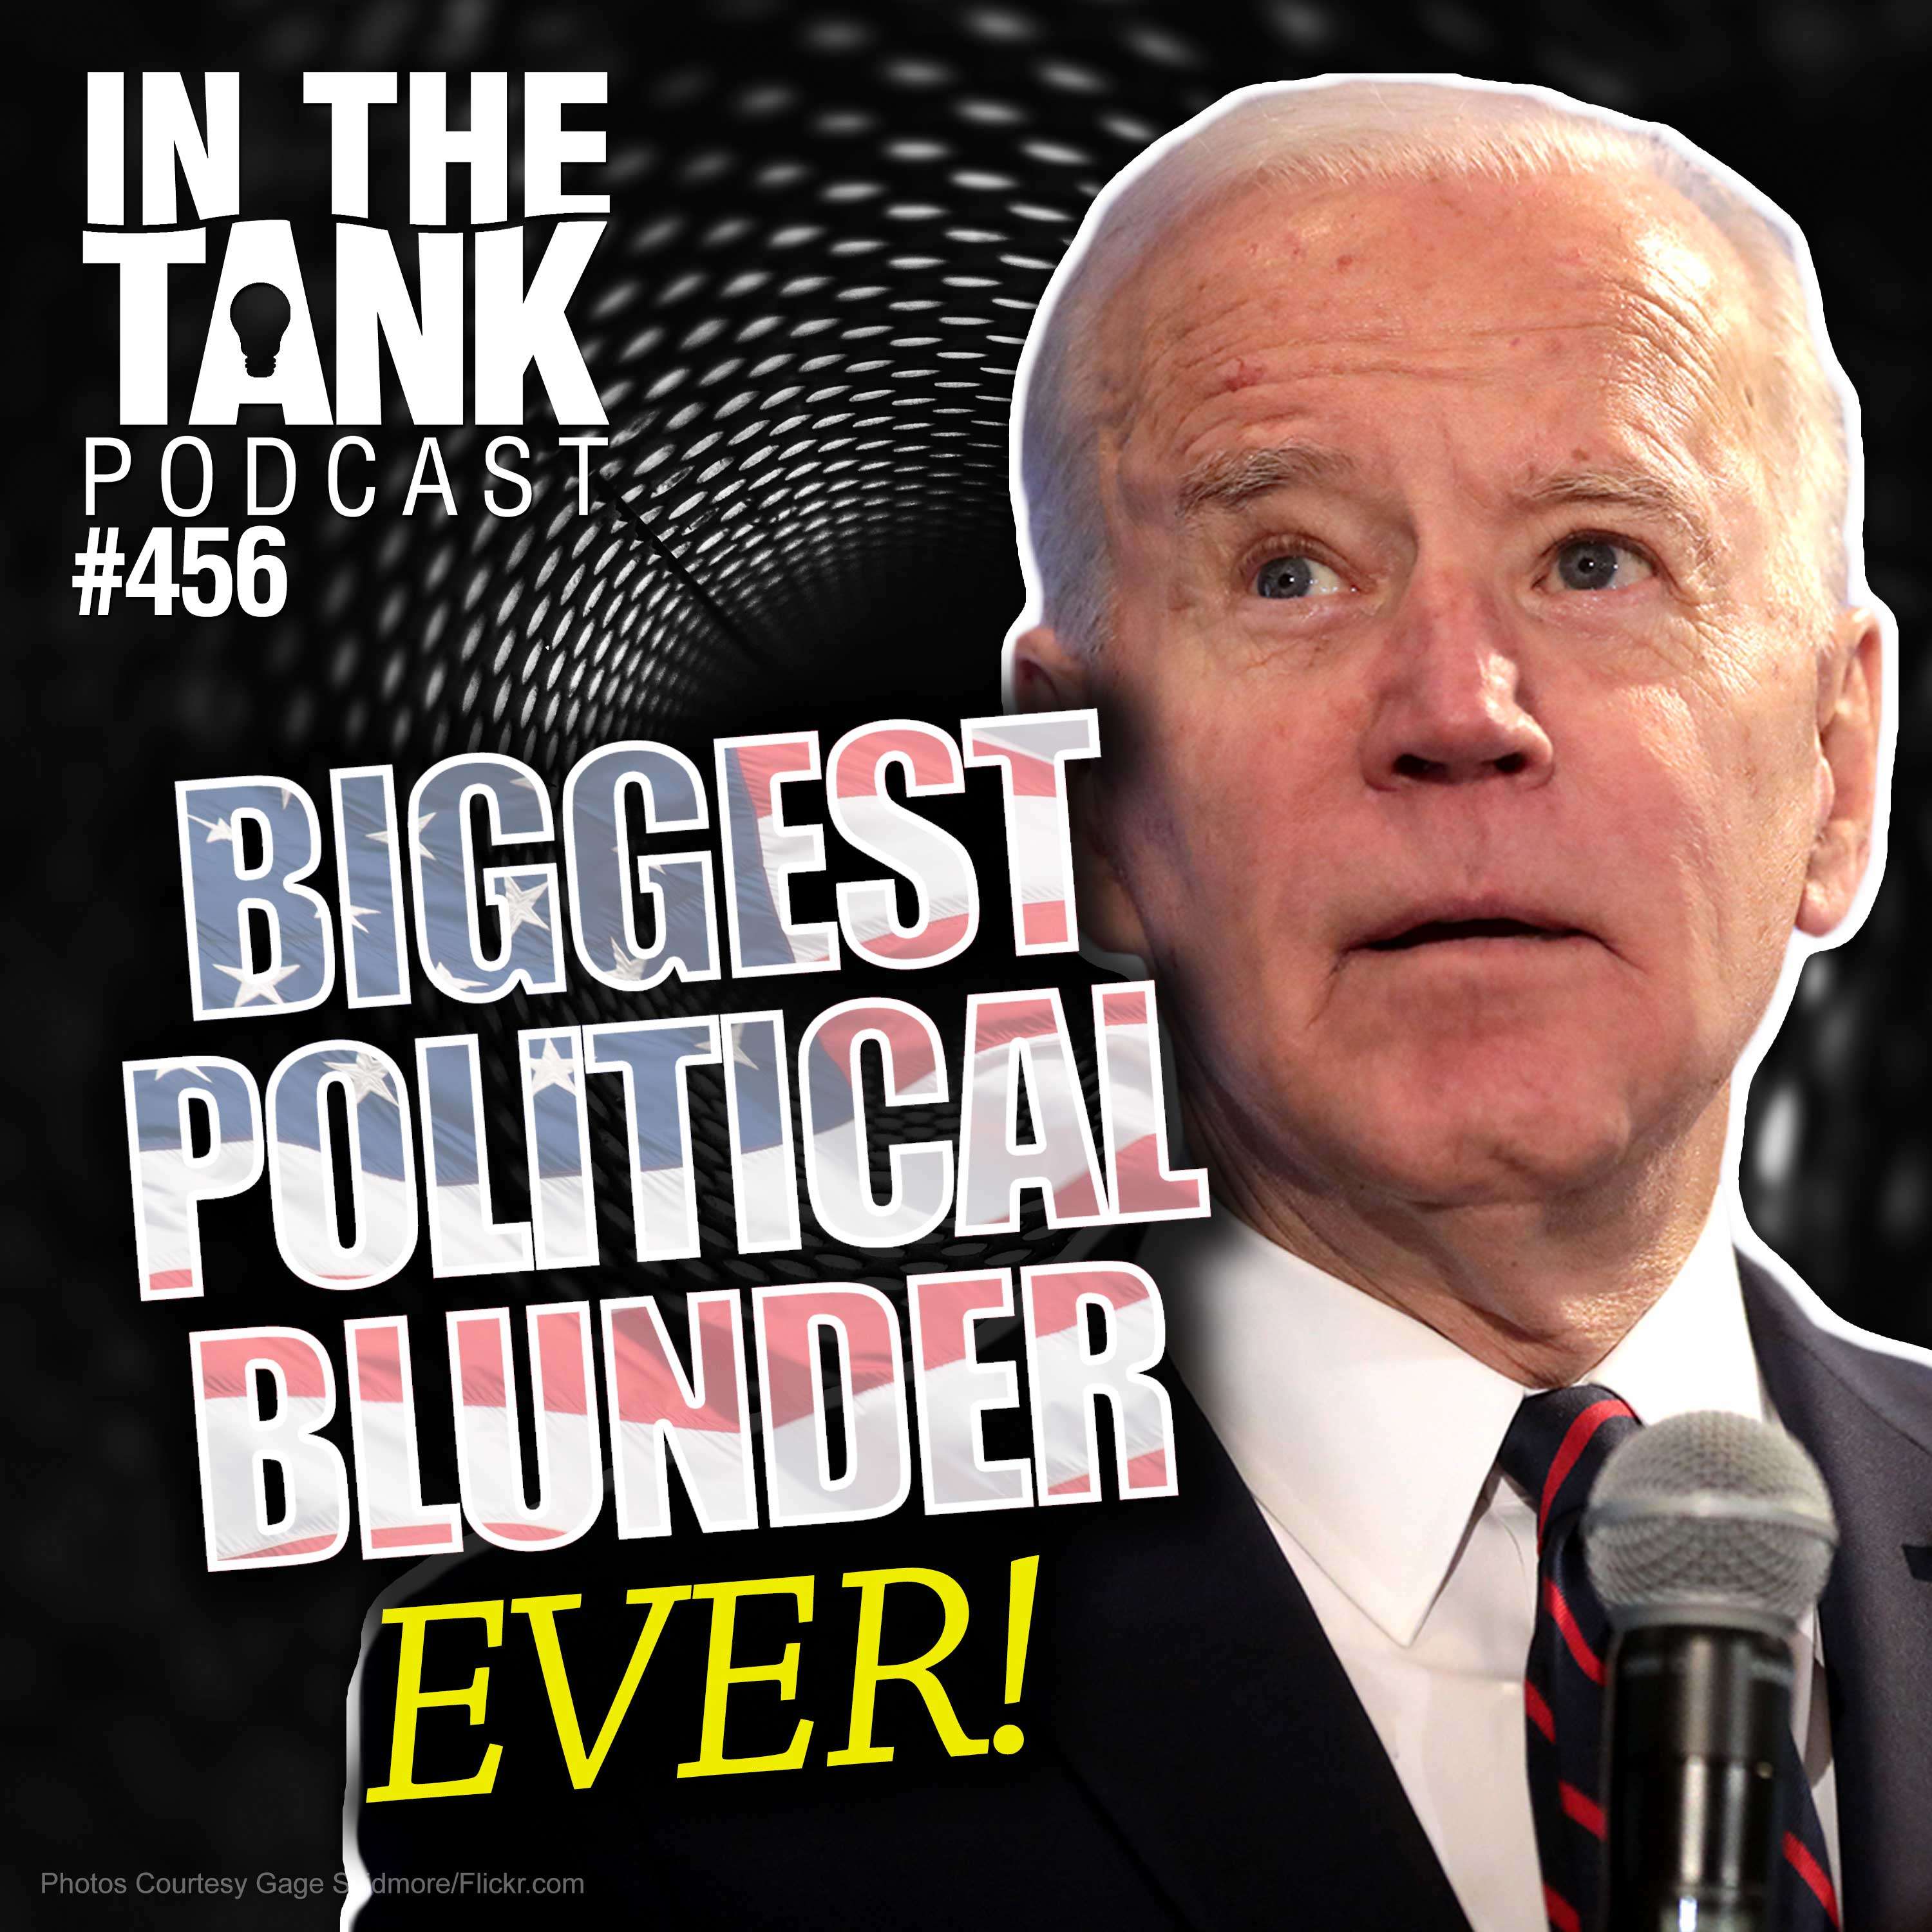 Biggest Political Blunder Ever! - In The Tank #456